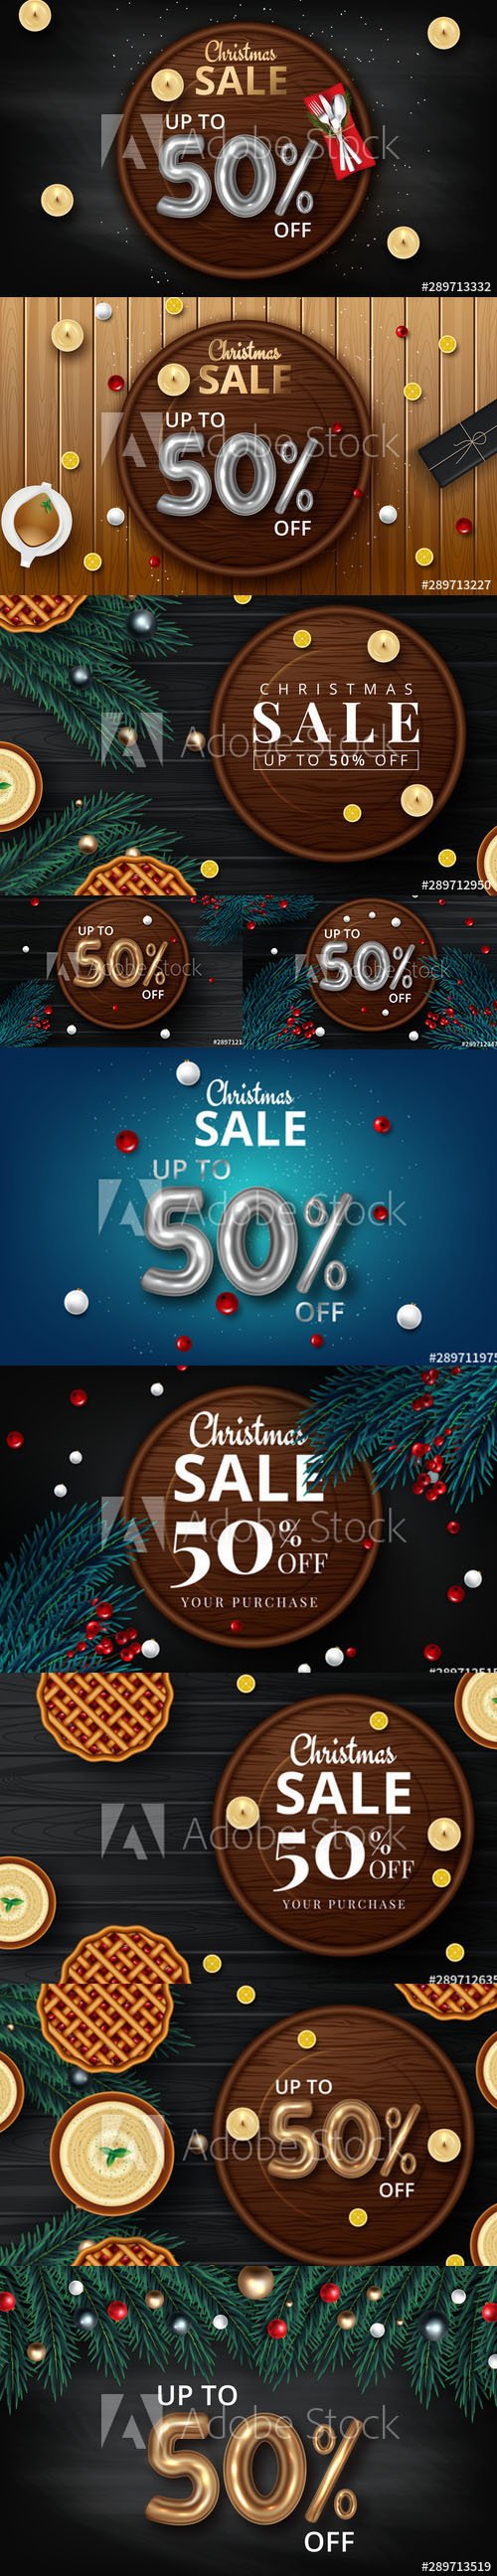 Christmas Sale Promotional Banner for Winter Holiday 2